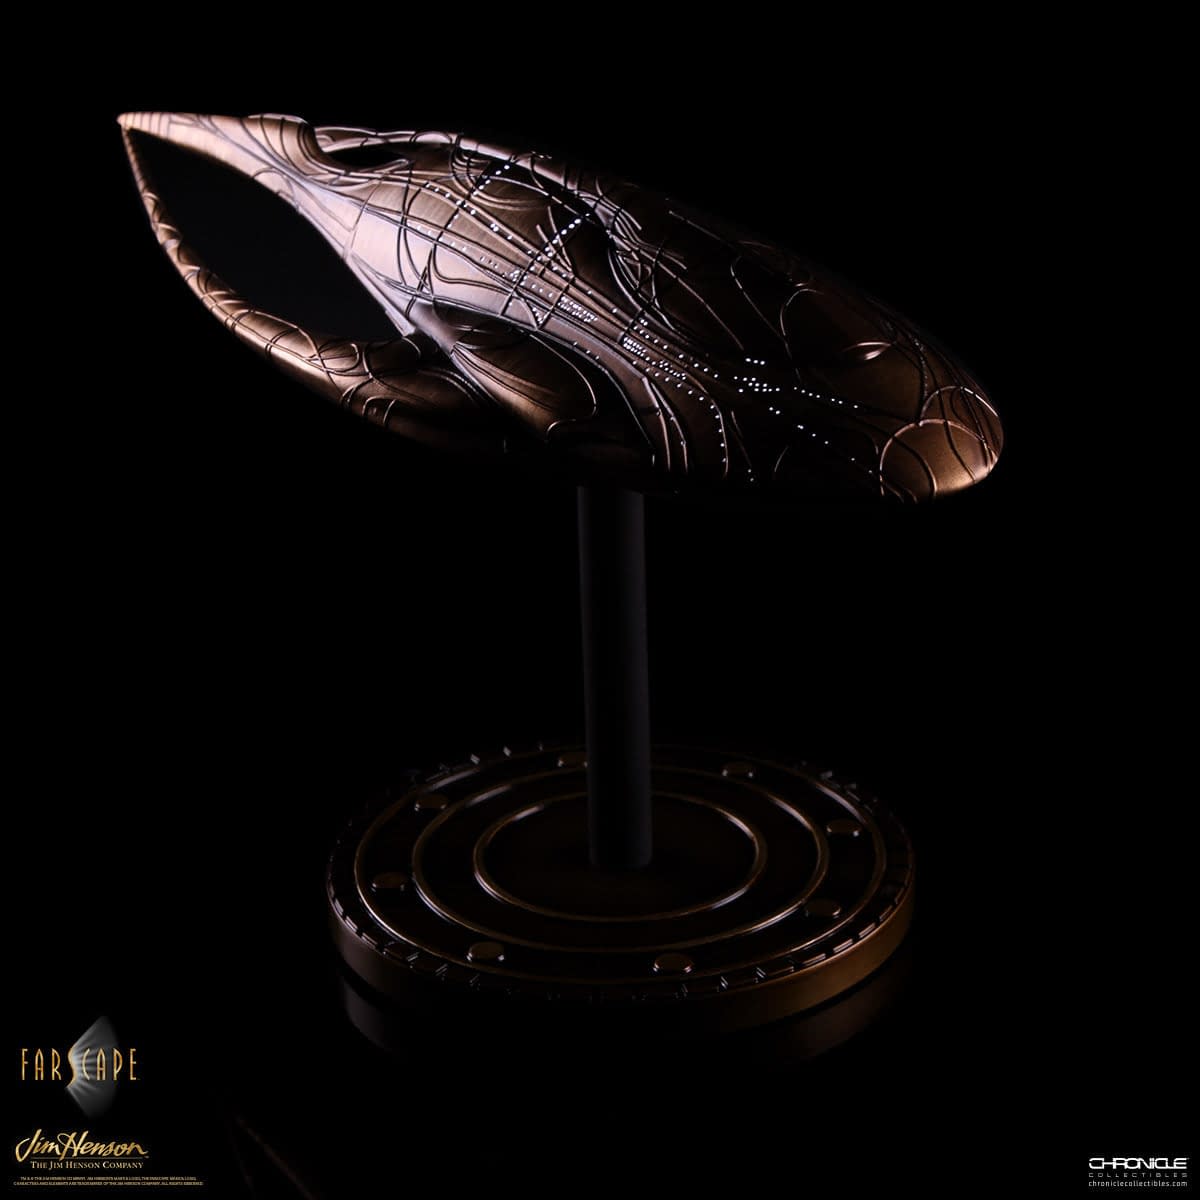 "Farscape" Fans Rejoice with the Statue of Moya Coming Soon